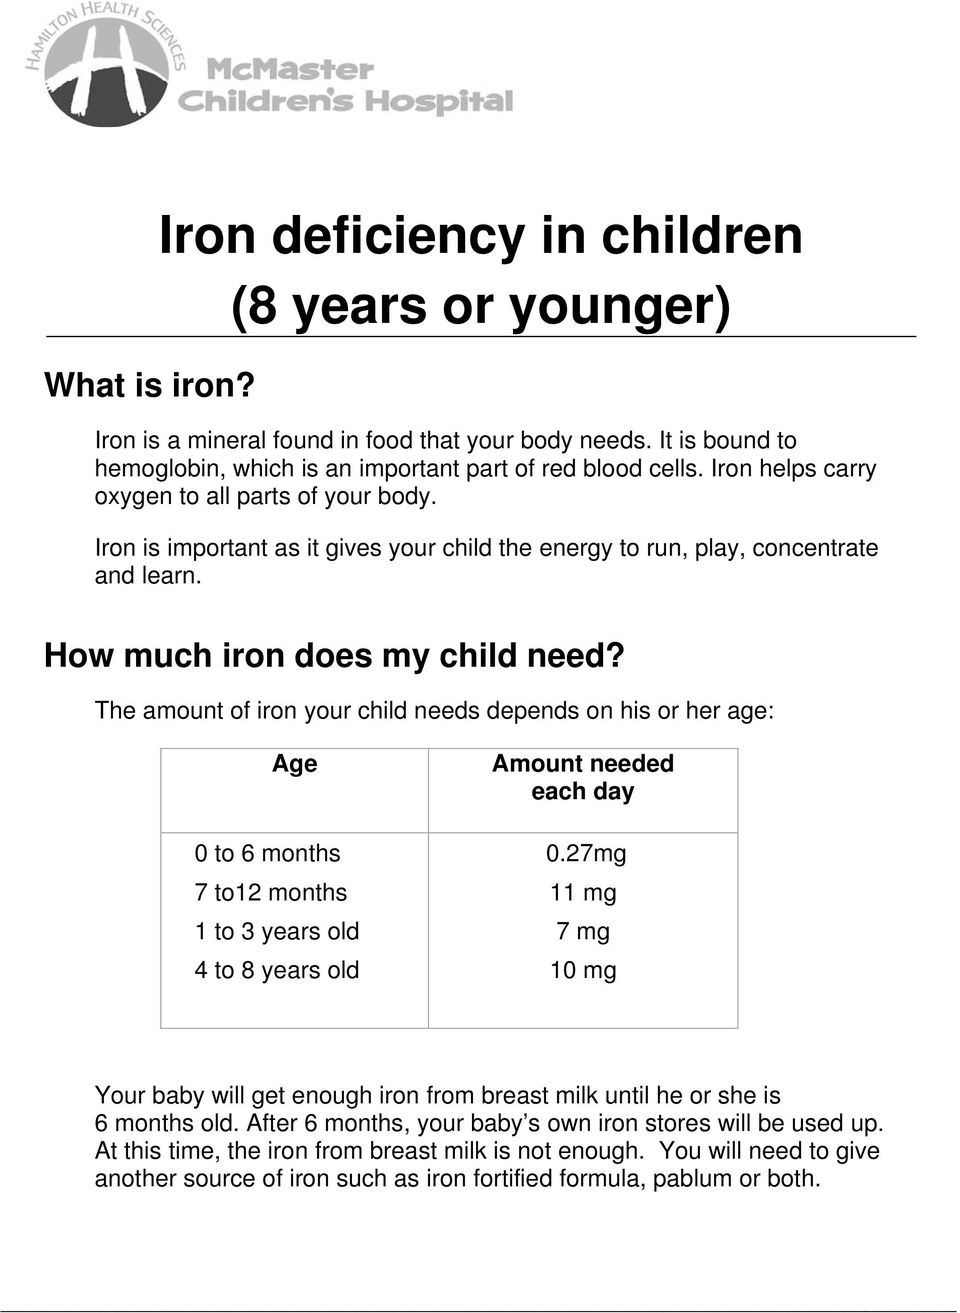 The amount of iron your child needs depends on his or her age: Age 0 to 6 months 7 to12 months 1 to 3 years old 4 to 8 years old Amount needed each day 0.